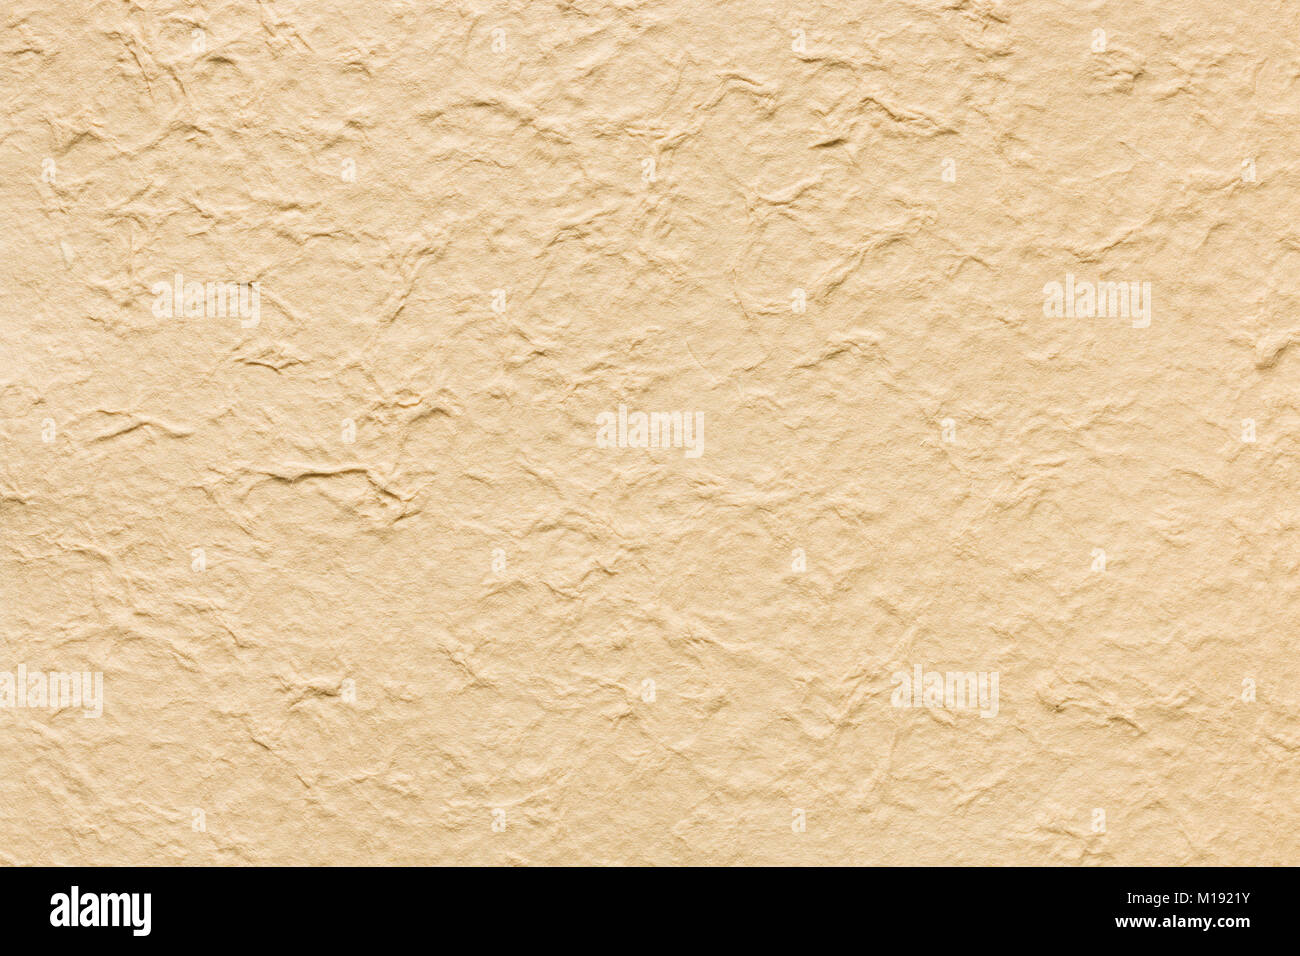 background from sheet of crumpled kraft paper Stock Photo